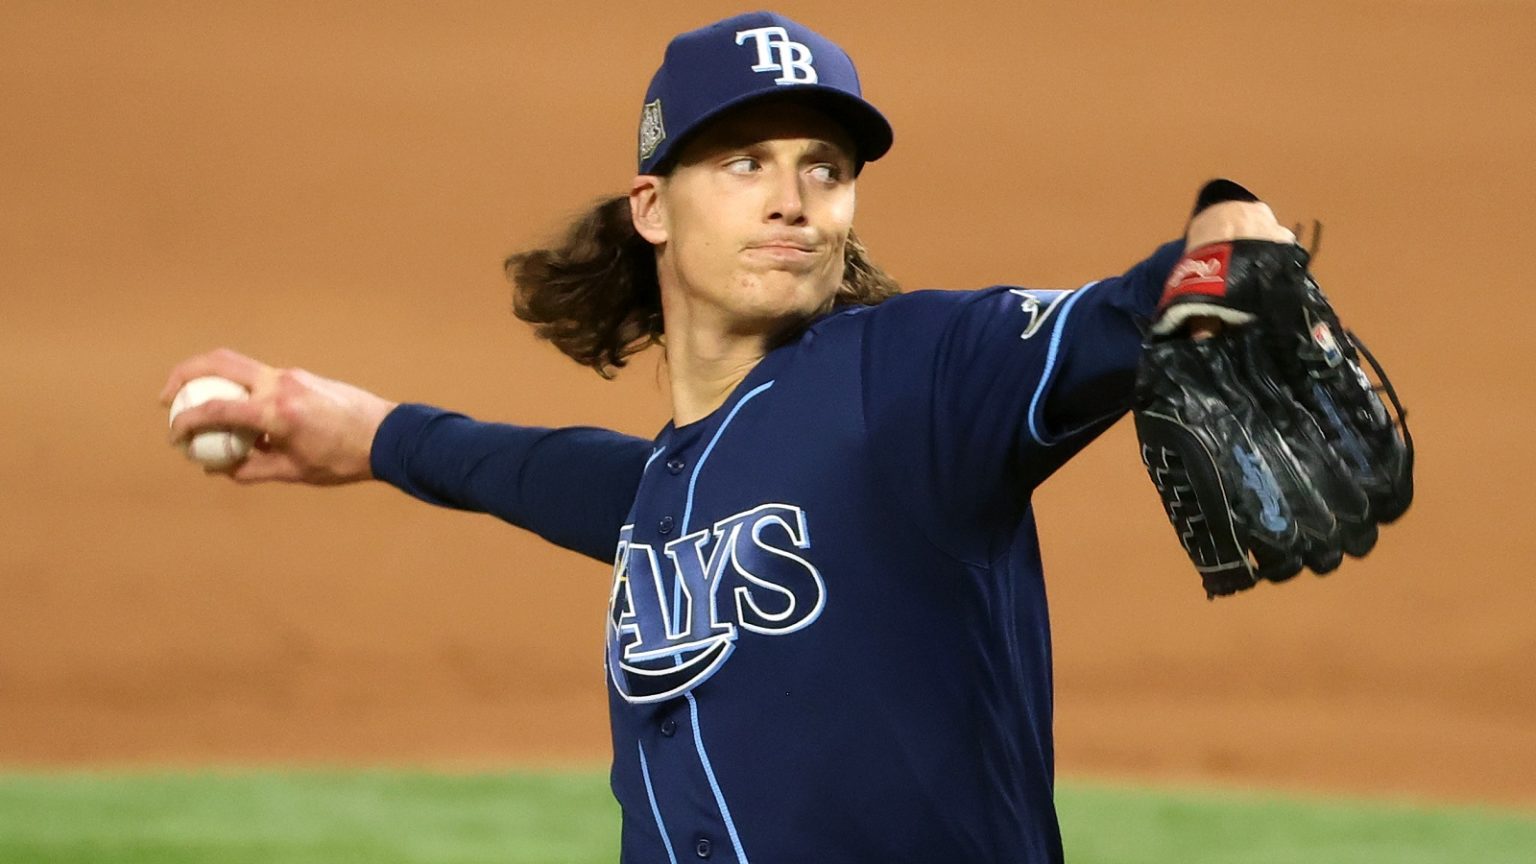 Tyler Glasnow gets recordbreaking contract from Rays